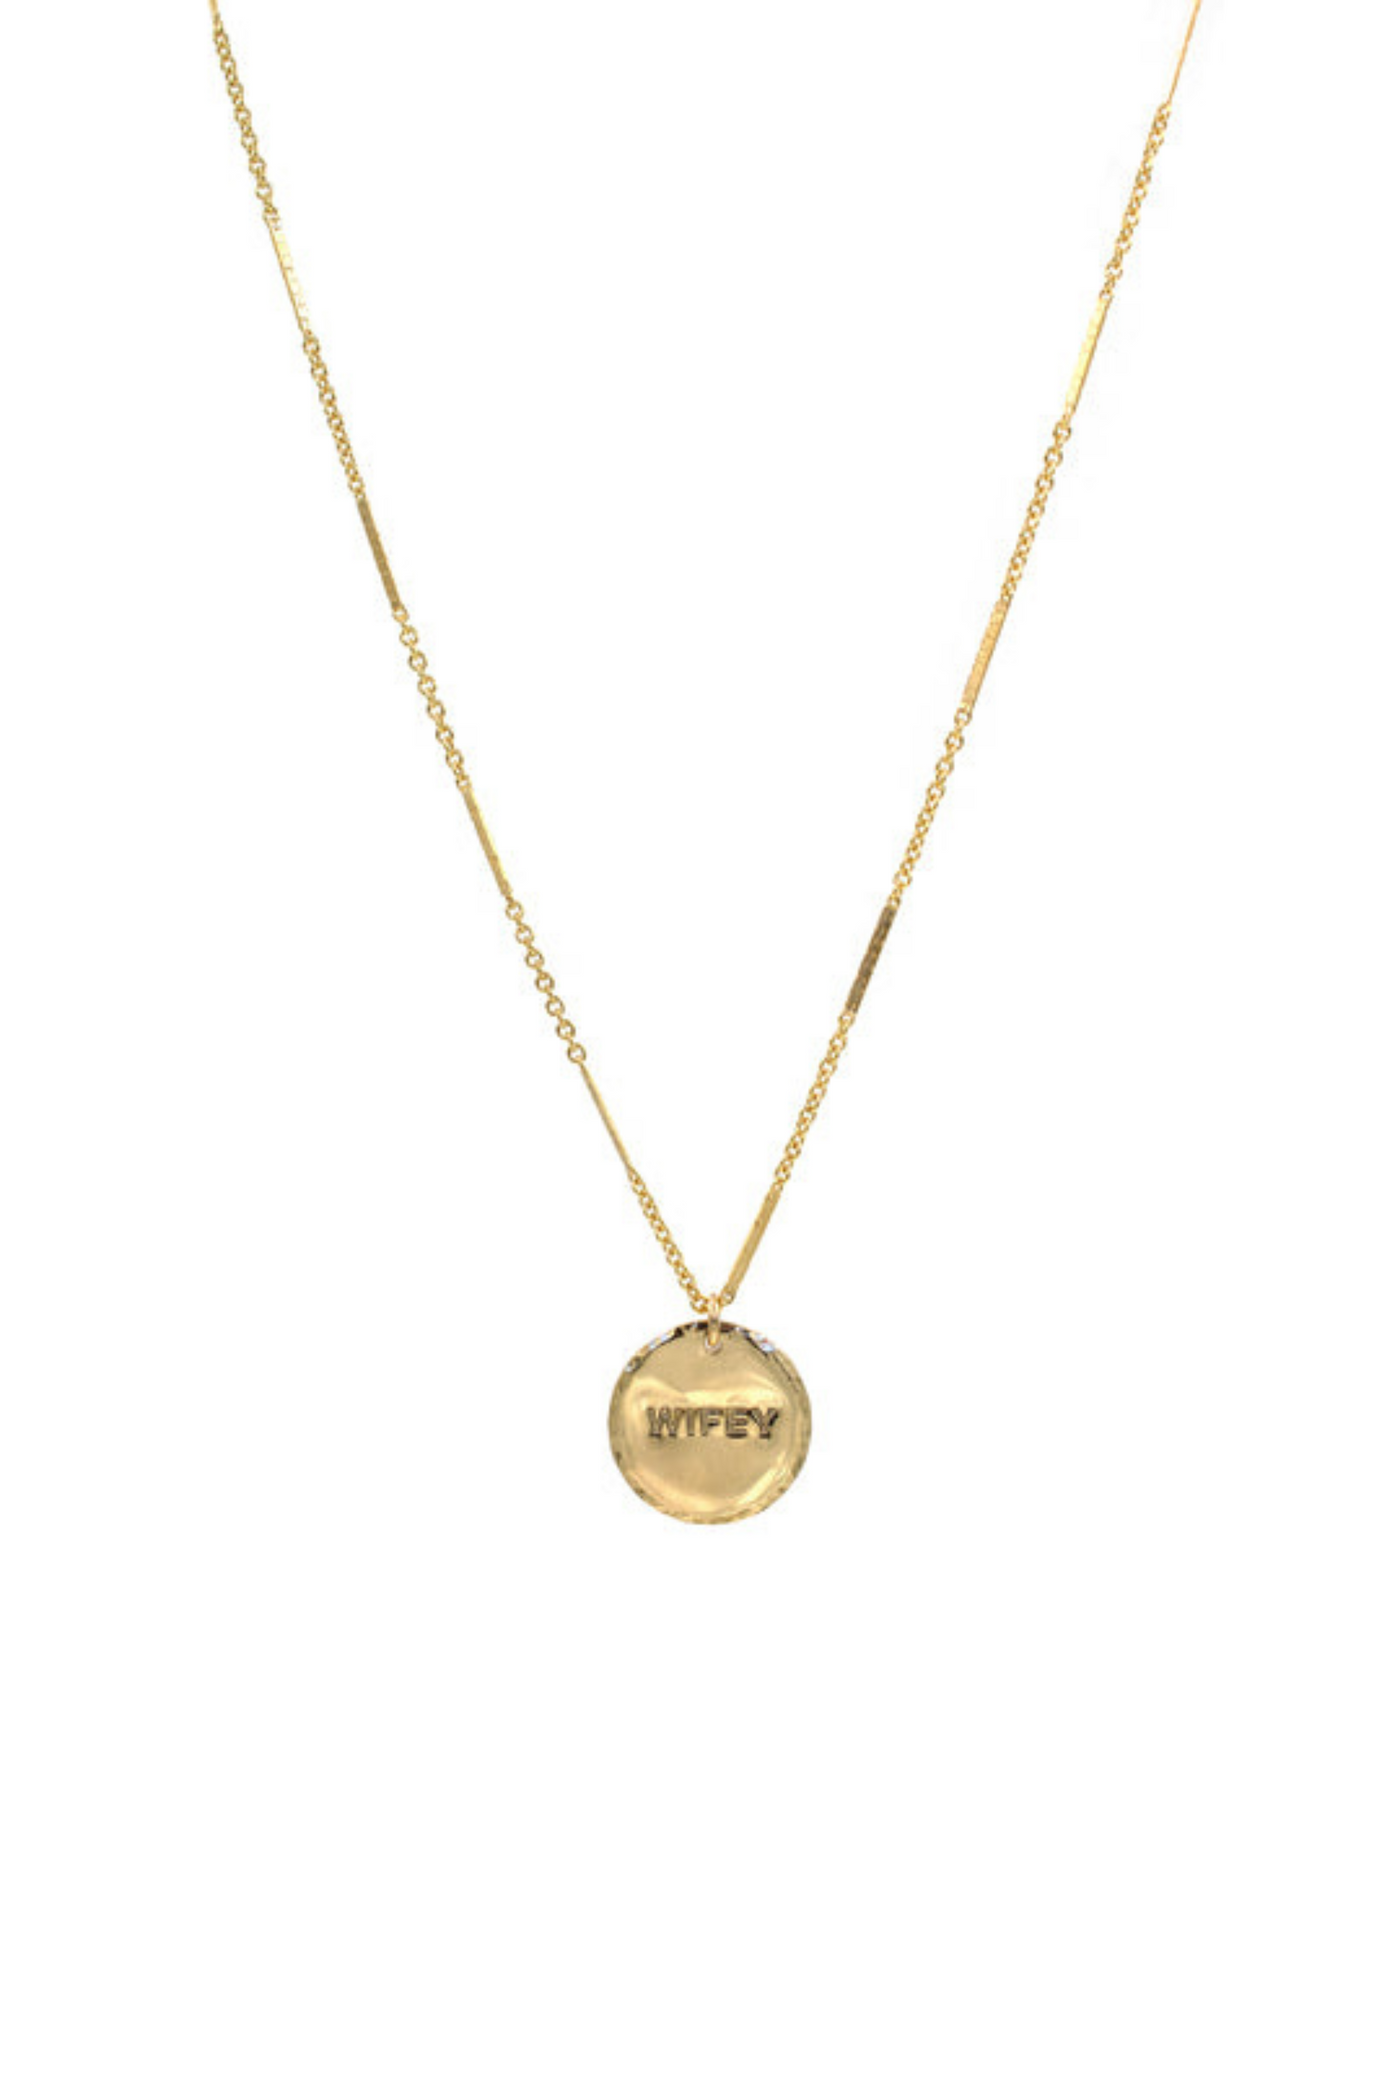 Wifey Coin Necklace